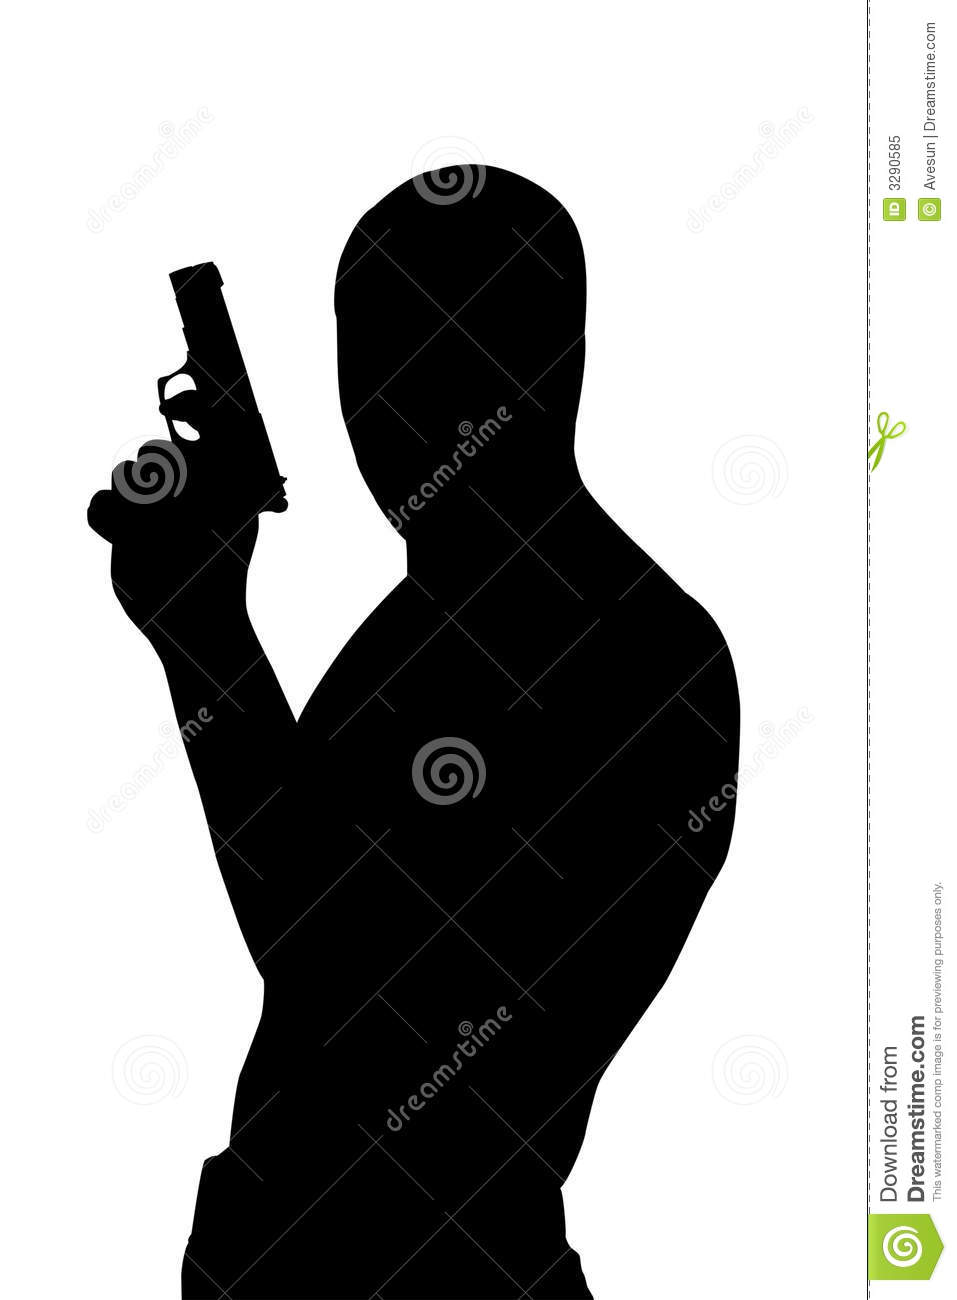 Gangster Silhouette Royalty Free Stock Photo   Image  3290585